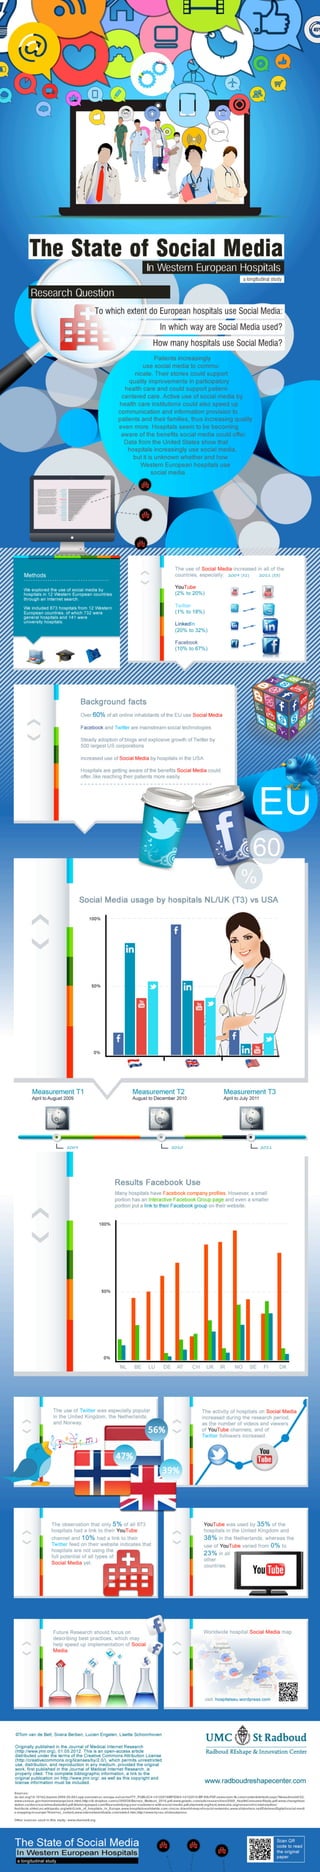 Health Care Social Media: Hospitals in Europe Embrace Social Media [INFOGRAPHIC]